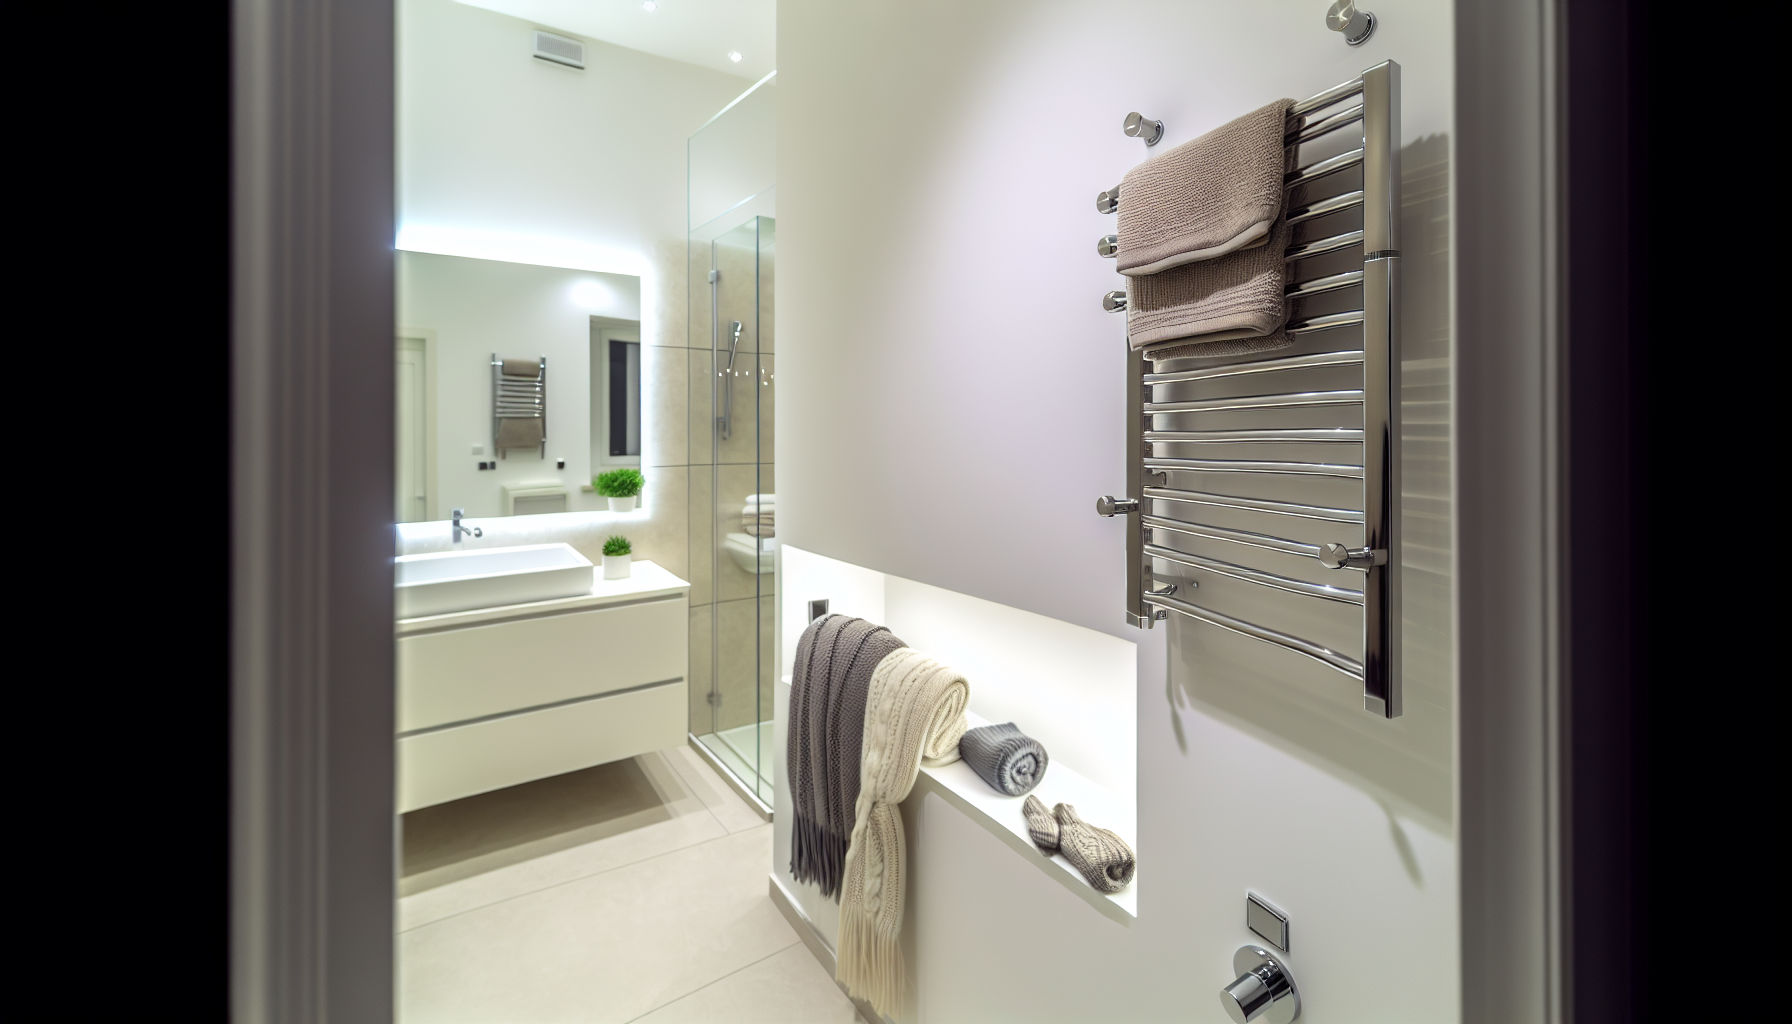 European bathroom with a towel warmer used for drying clothes